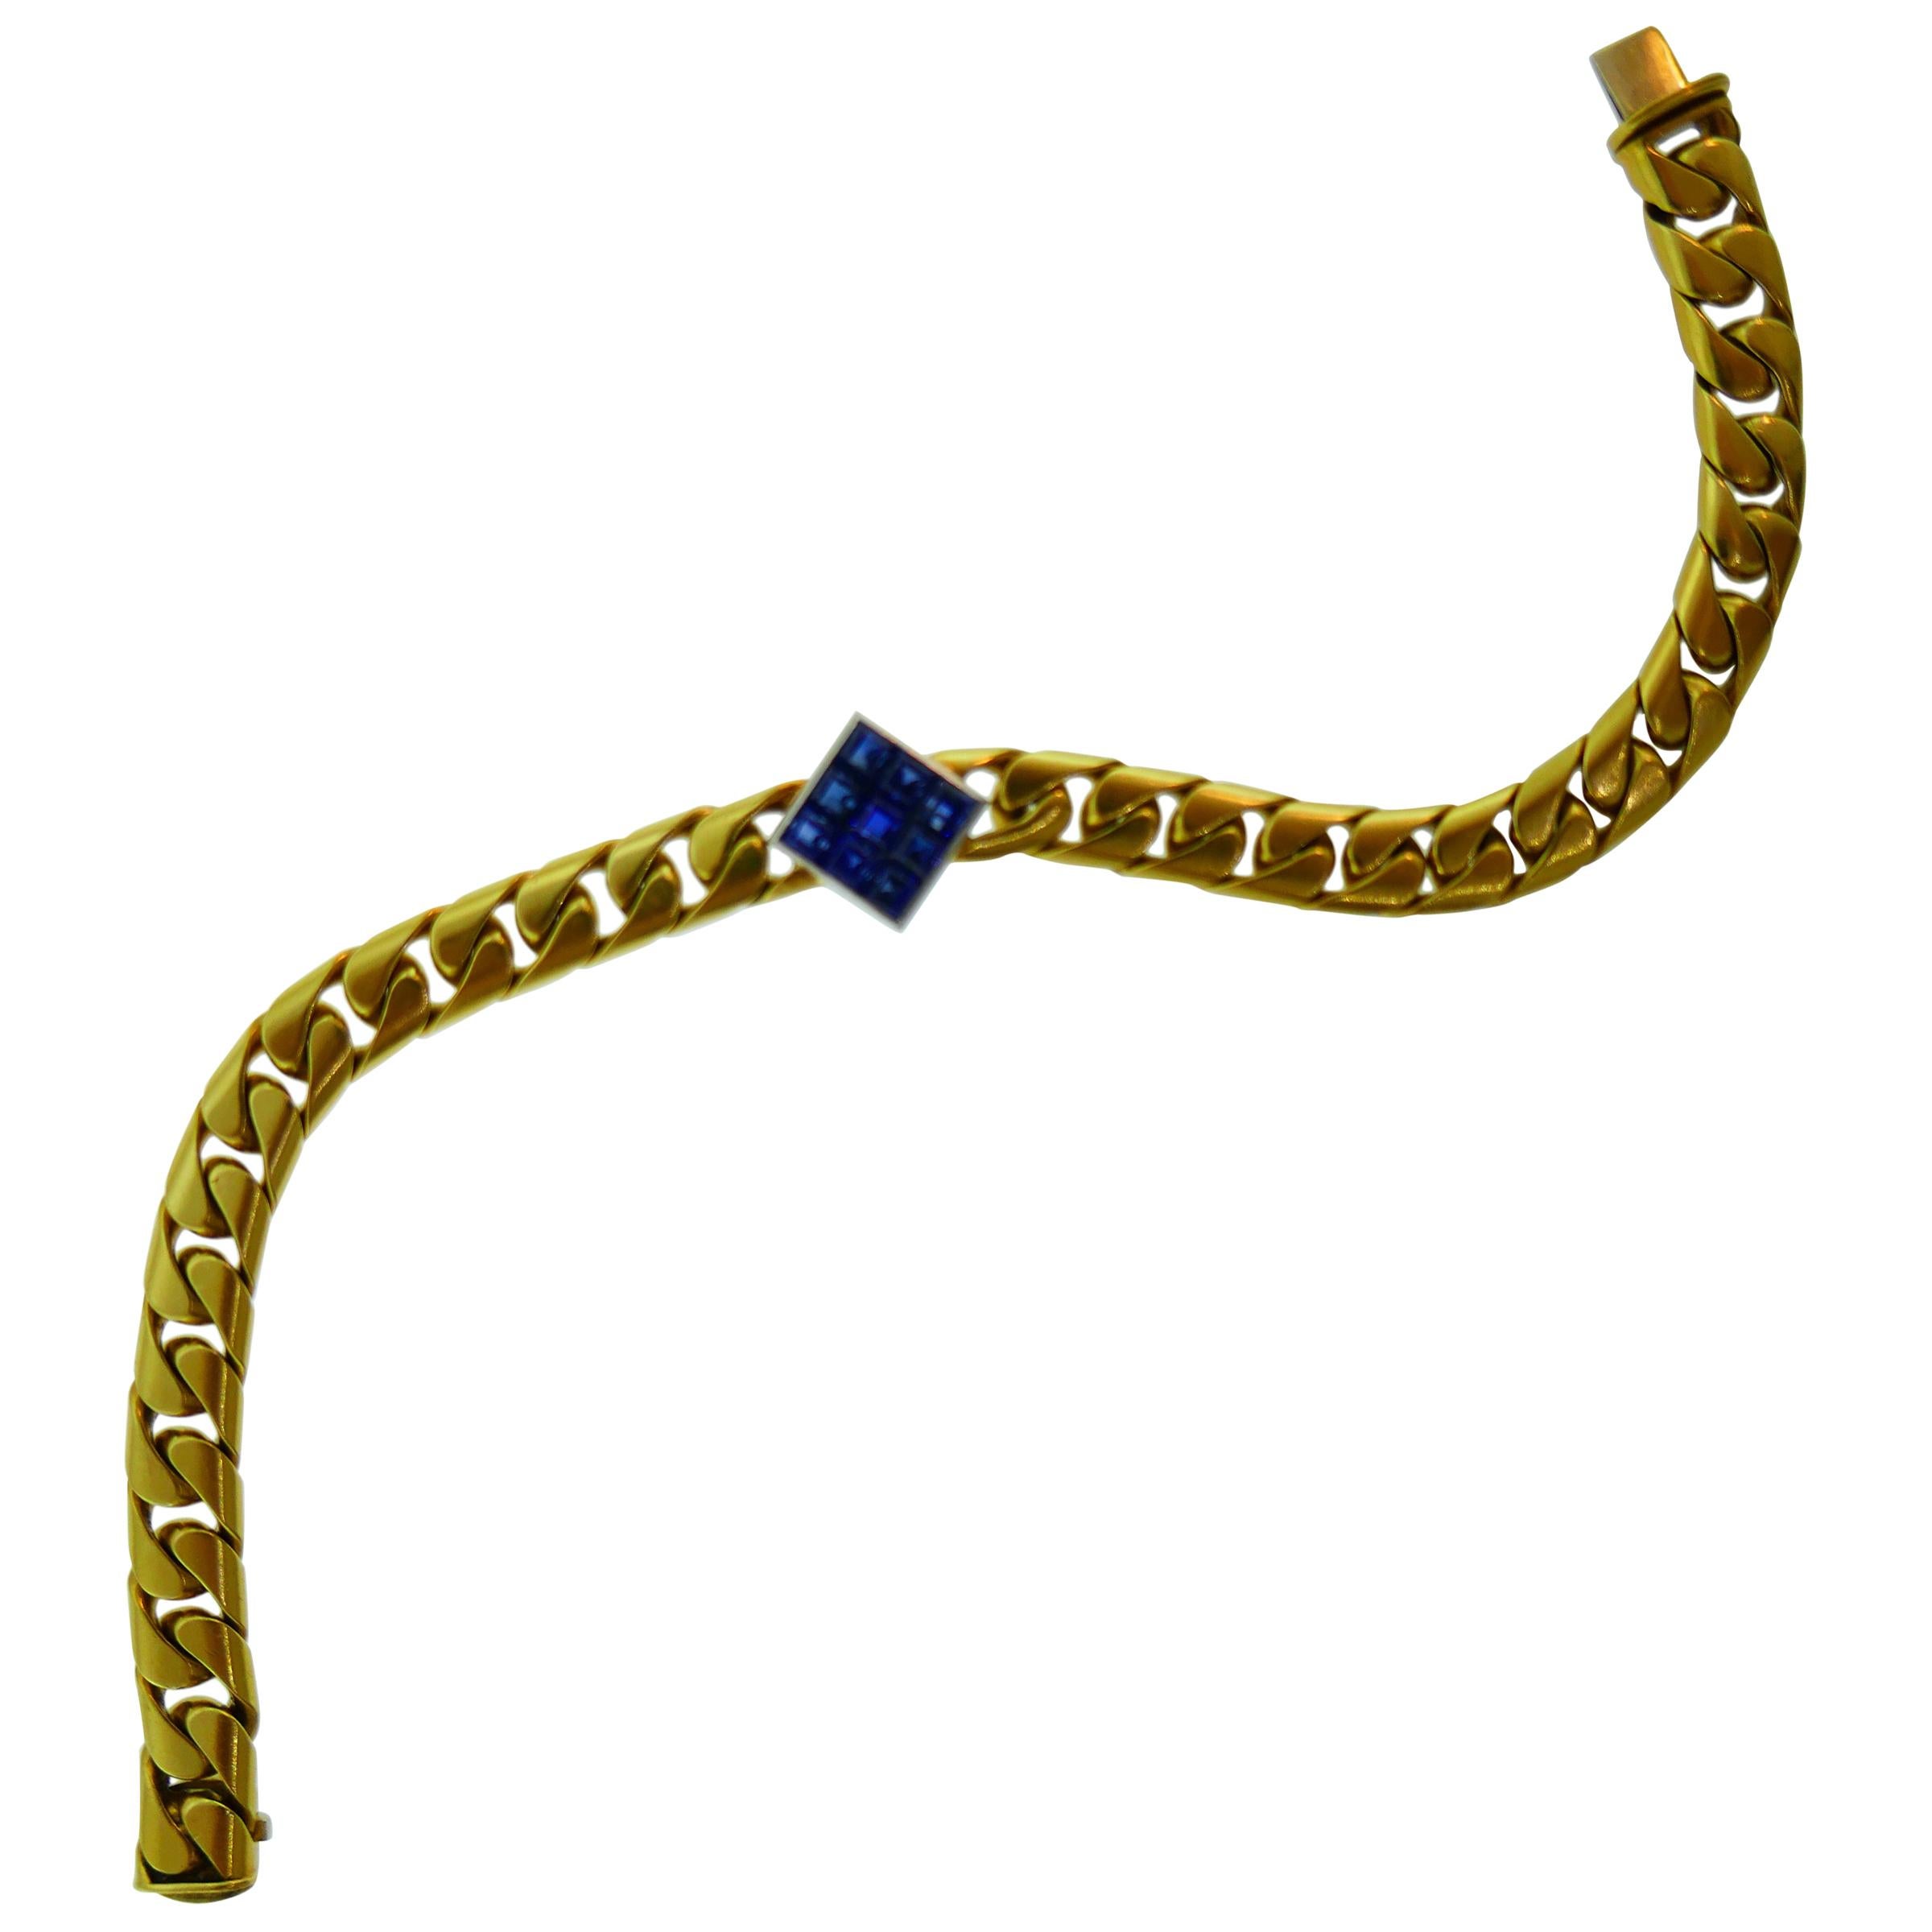 Fred Paris 18 Karat Yellow and White Gold & Sapphire Link Bracelet, circa 1980s For Sale